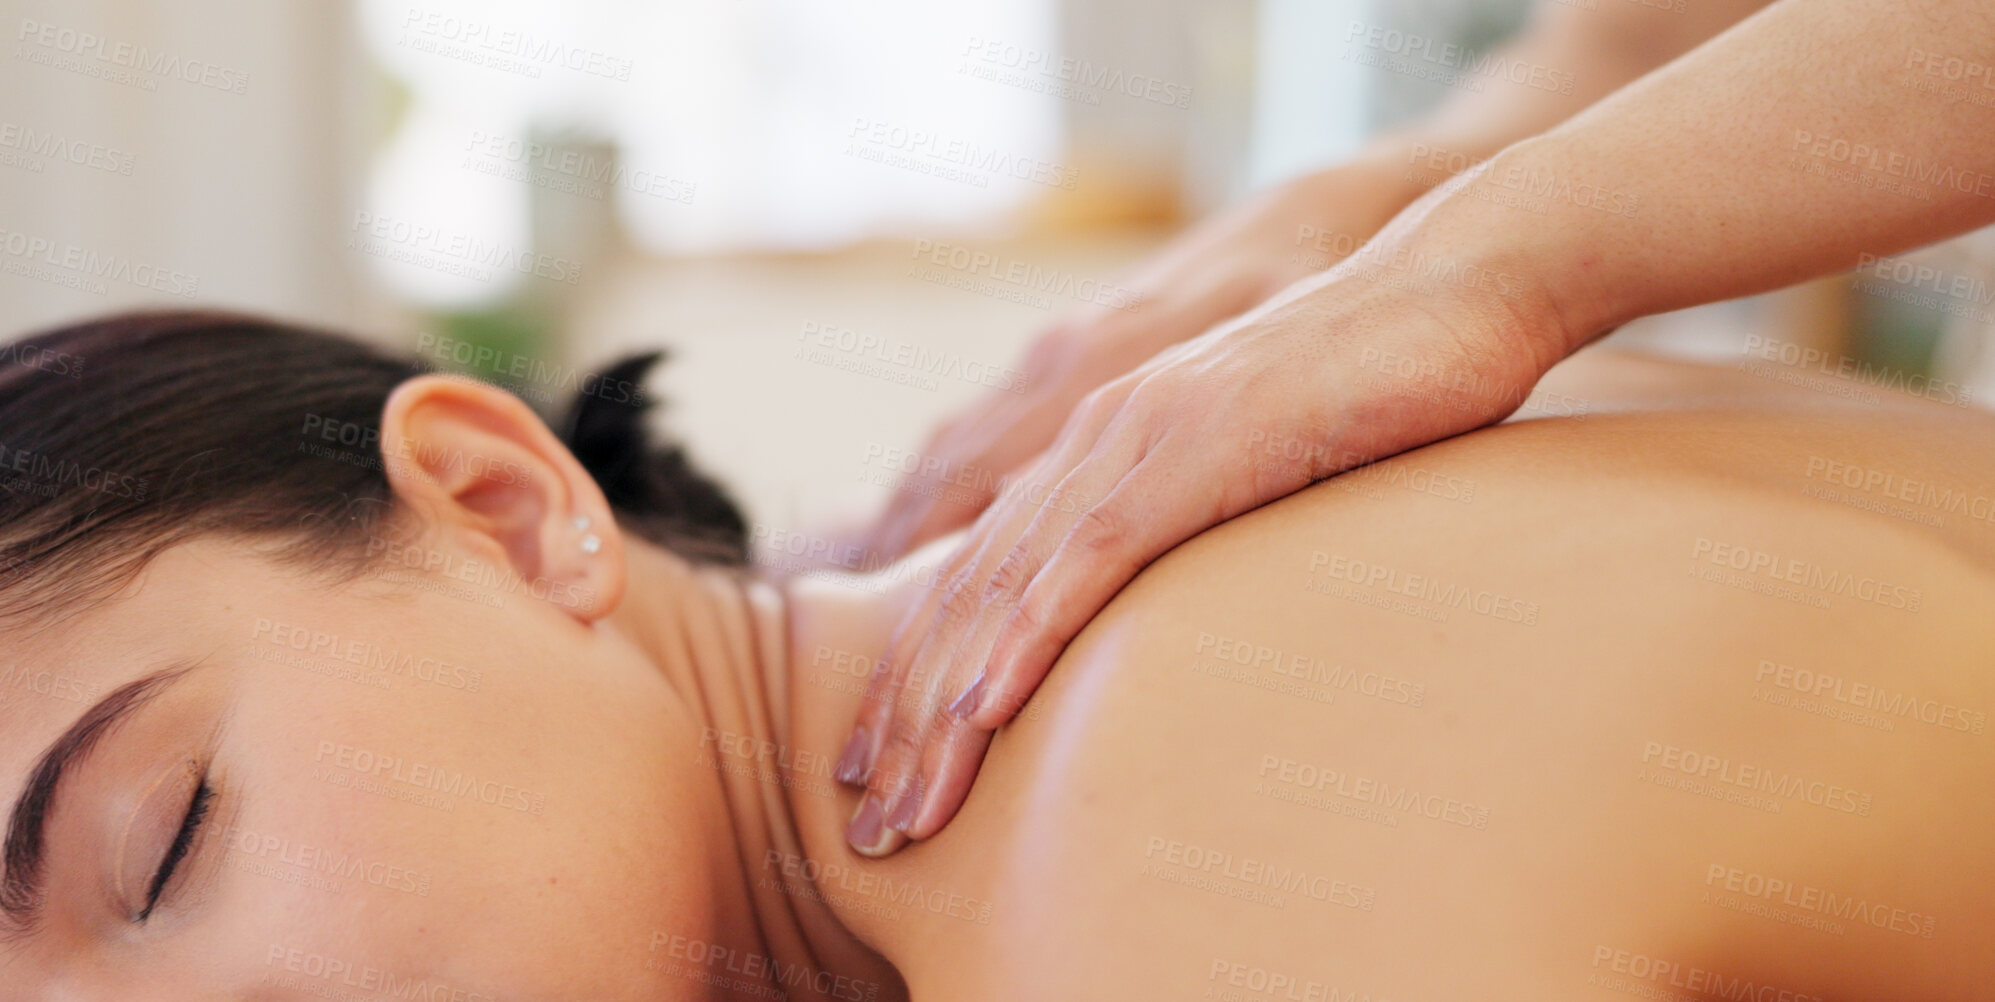 Buy stock photo Massage, skin and hands on woman with shoulder pain in spa, wellness resort or calm luxury service to relax in peace. Body, therapist and release stress with healthy meditation, care and zen healing